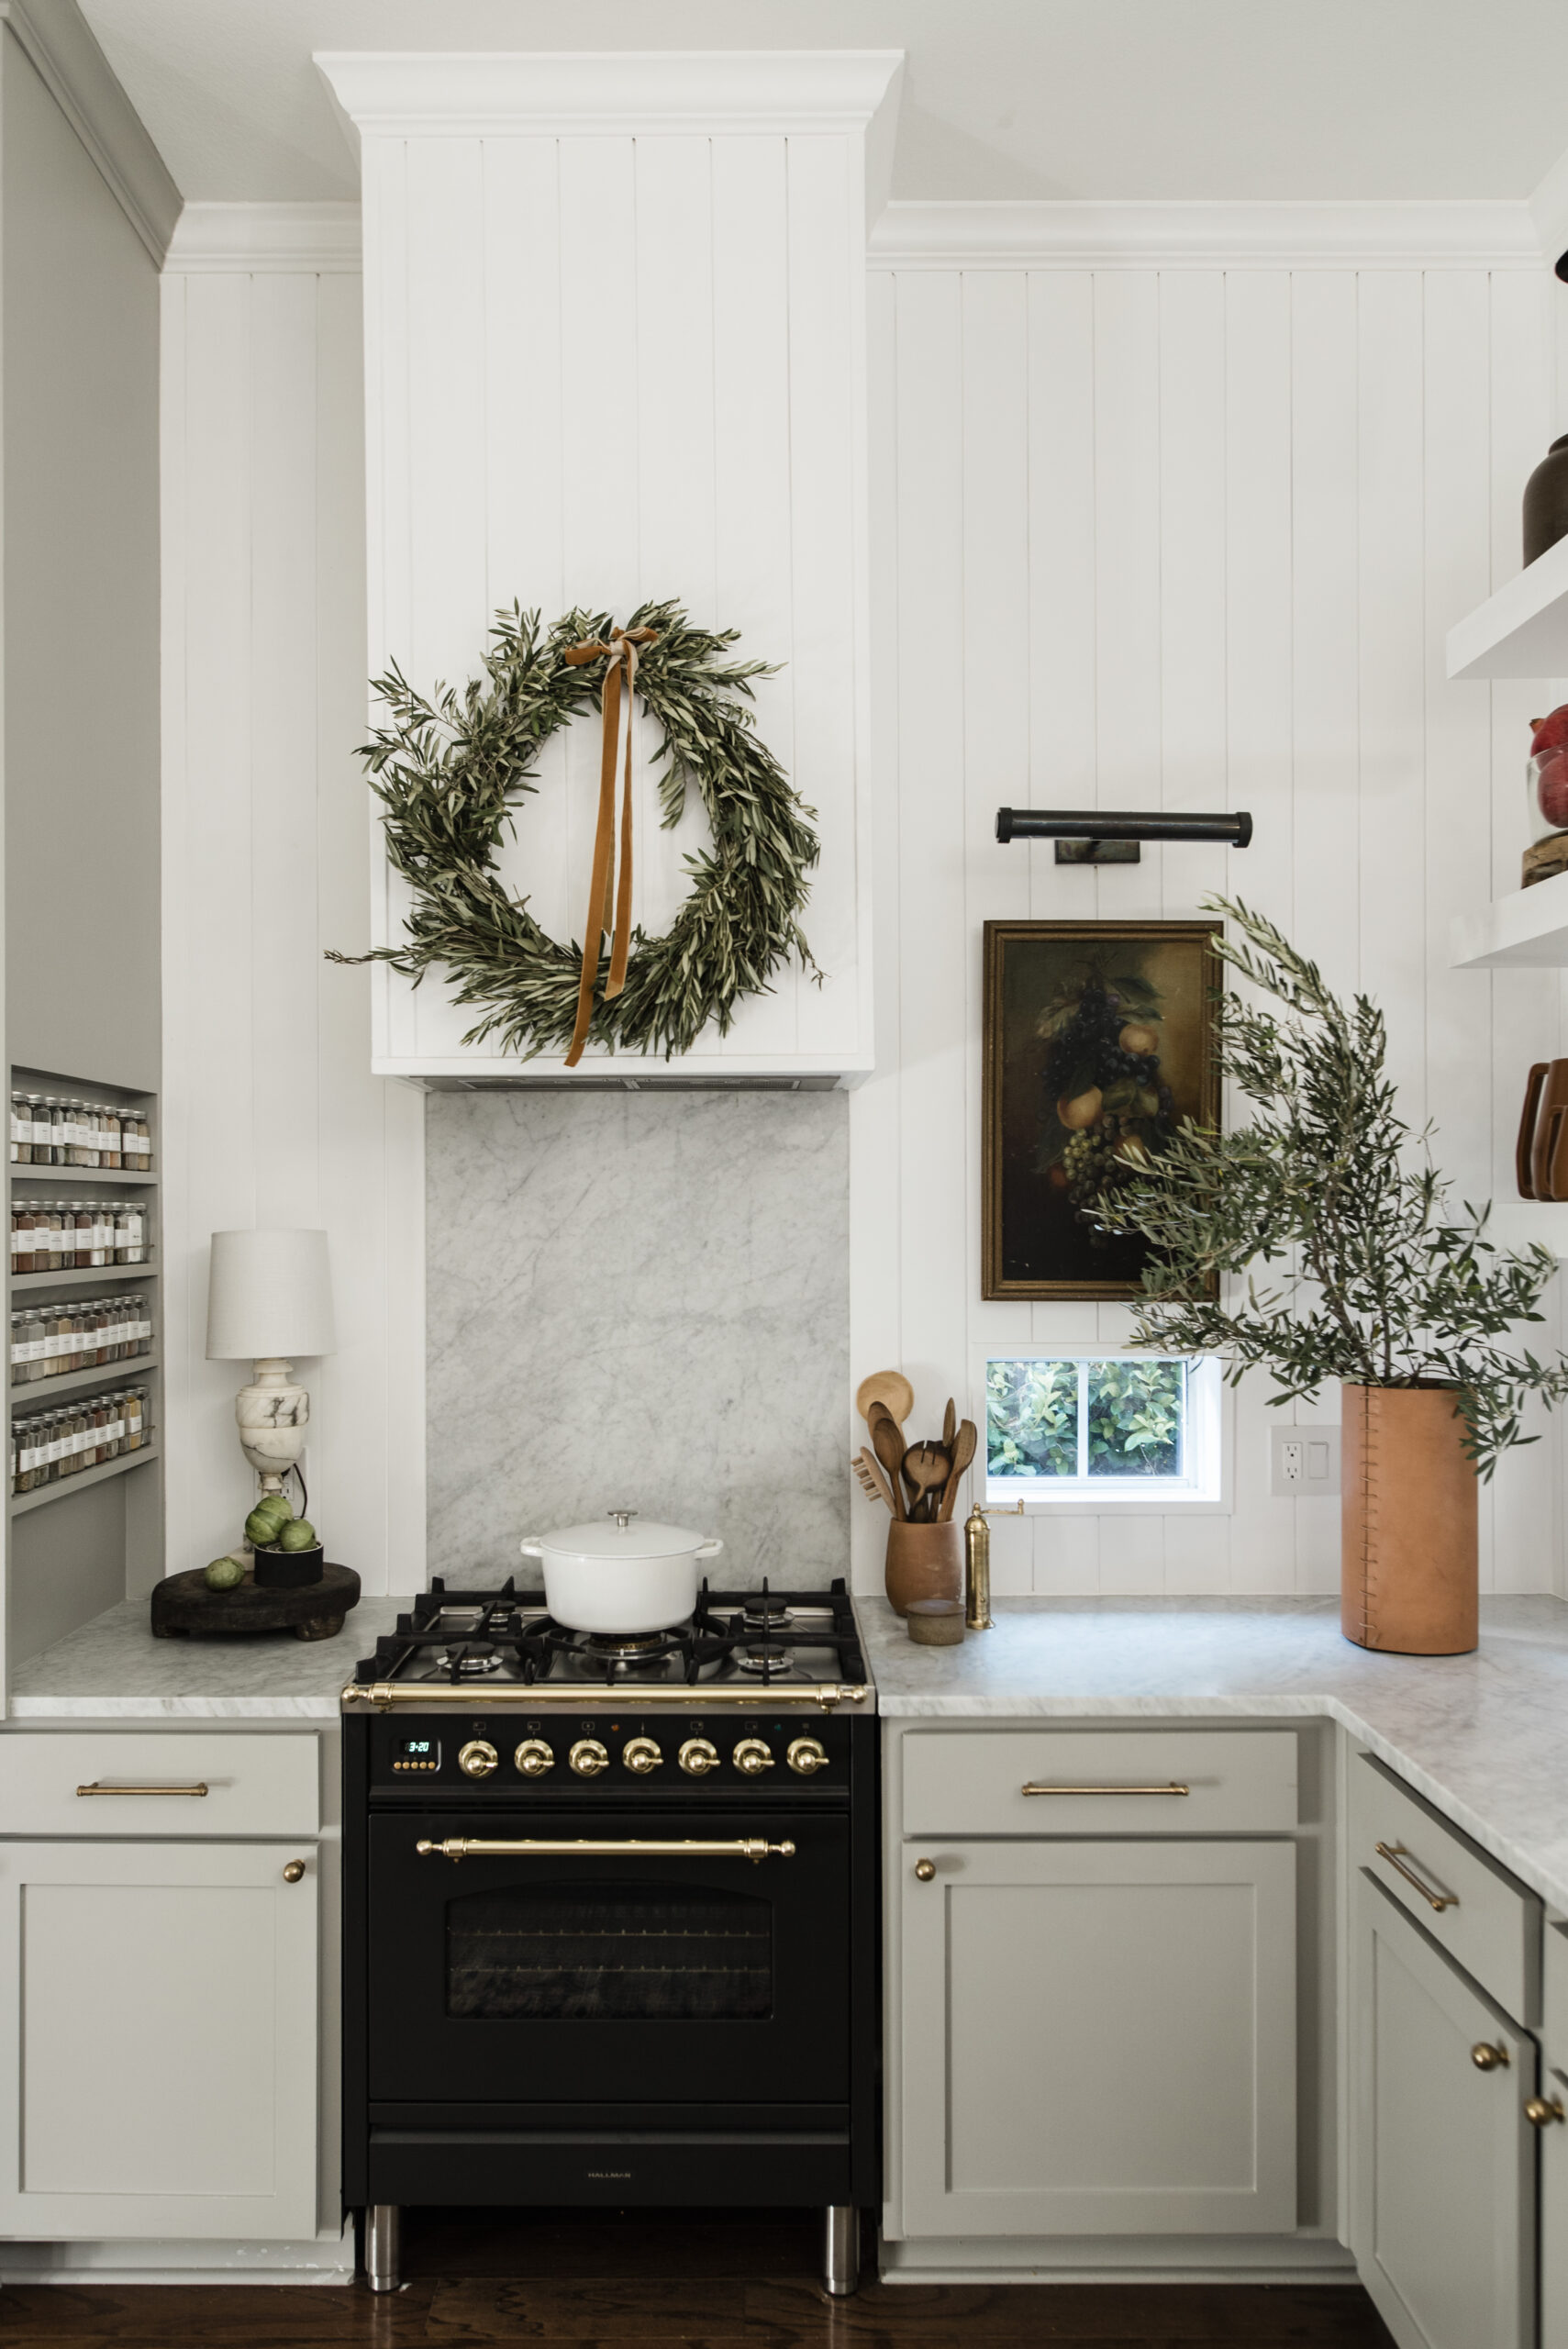 olive leaf wreath holiday decorating ideas in the kitchen